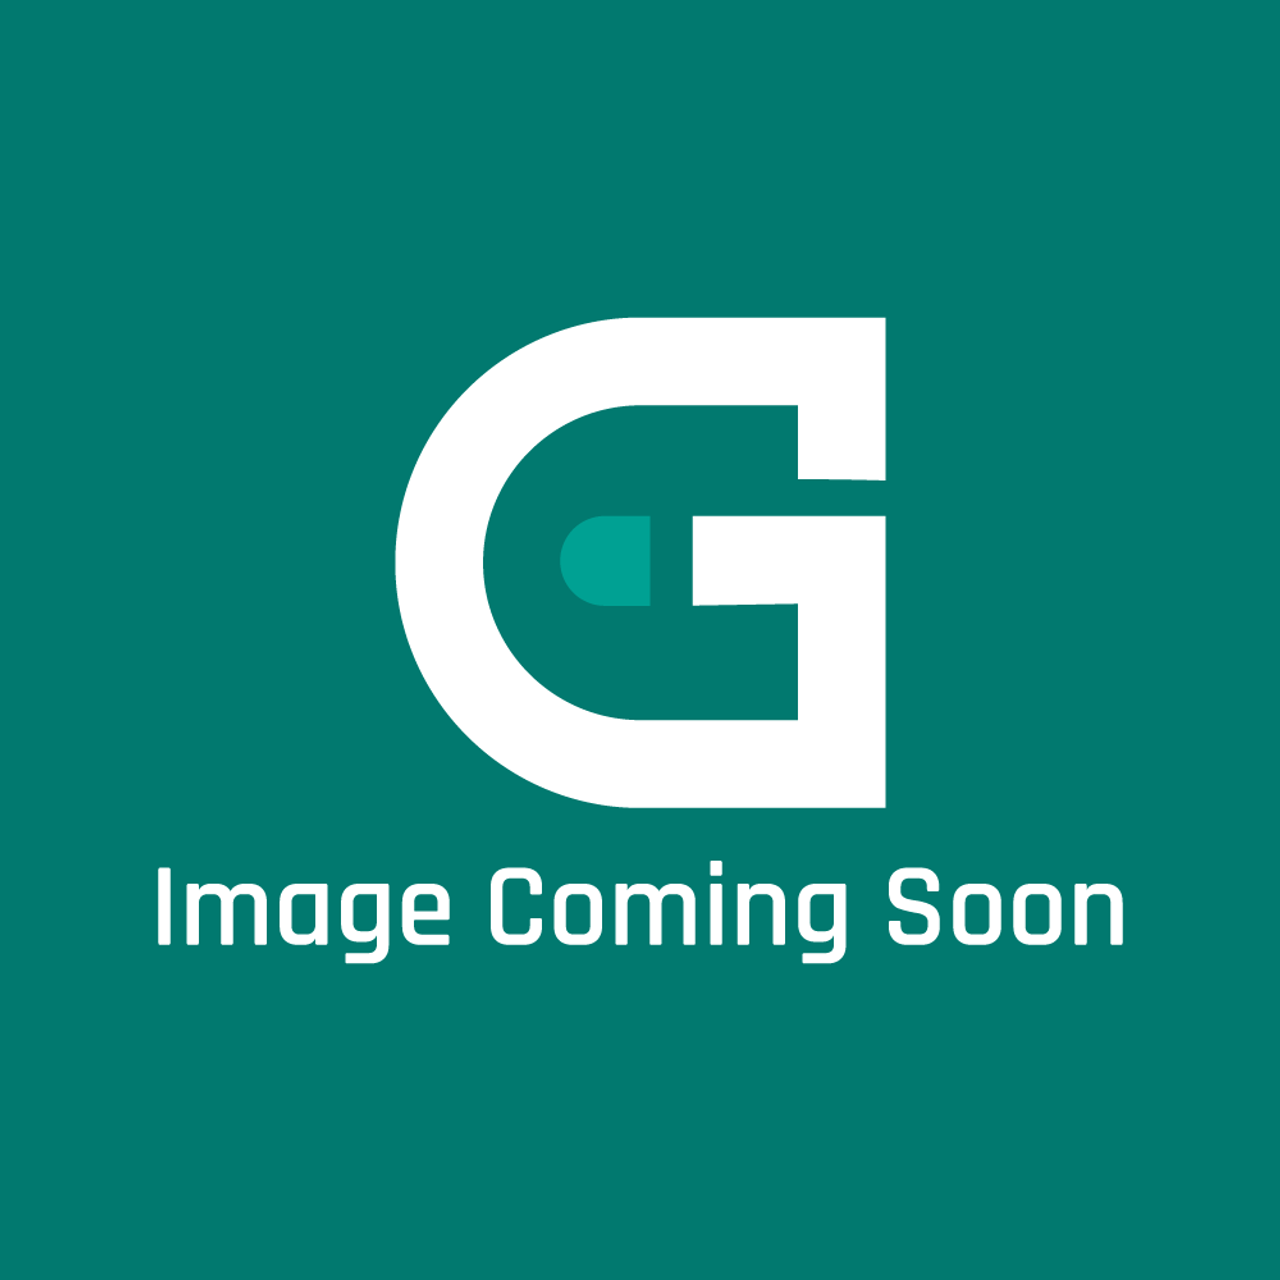 GE Appliances WH2X1201 - Scr 1/4-20 B - Image Coming Soon!